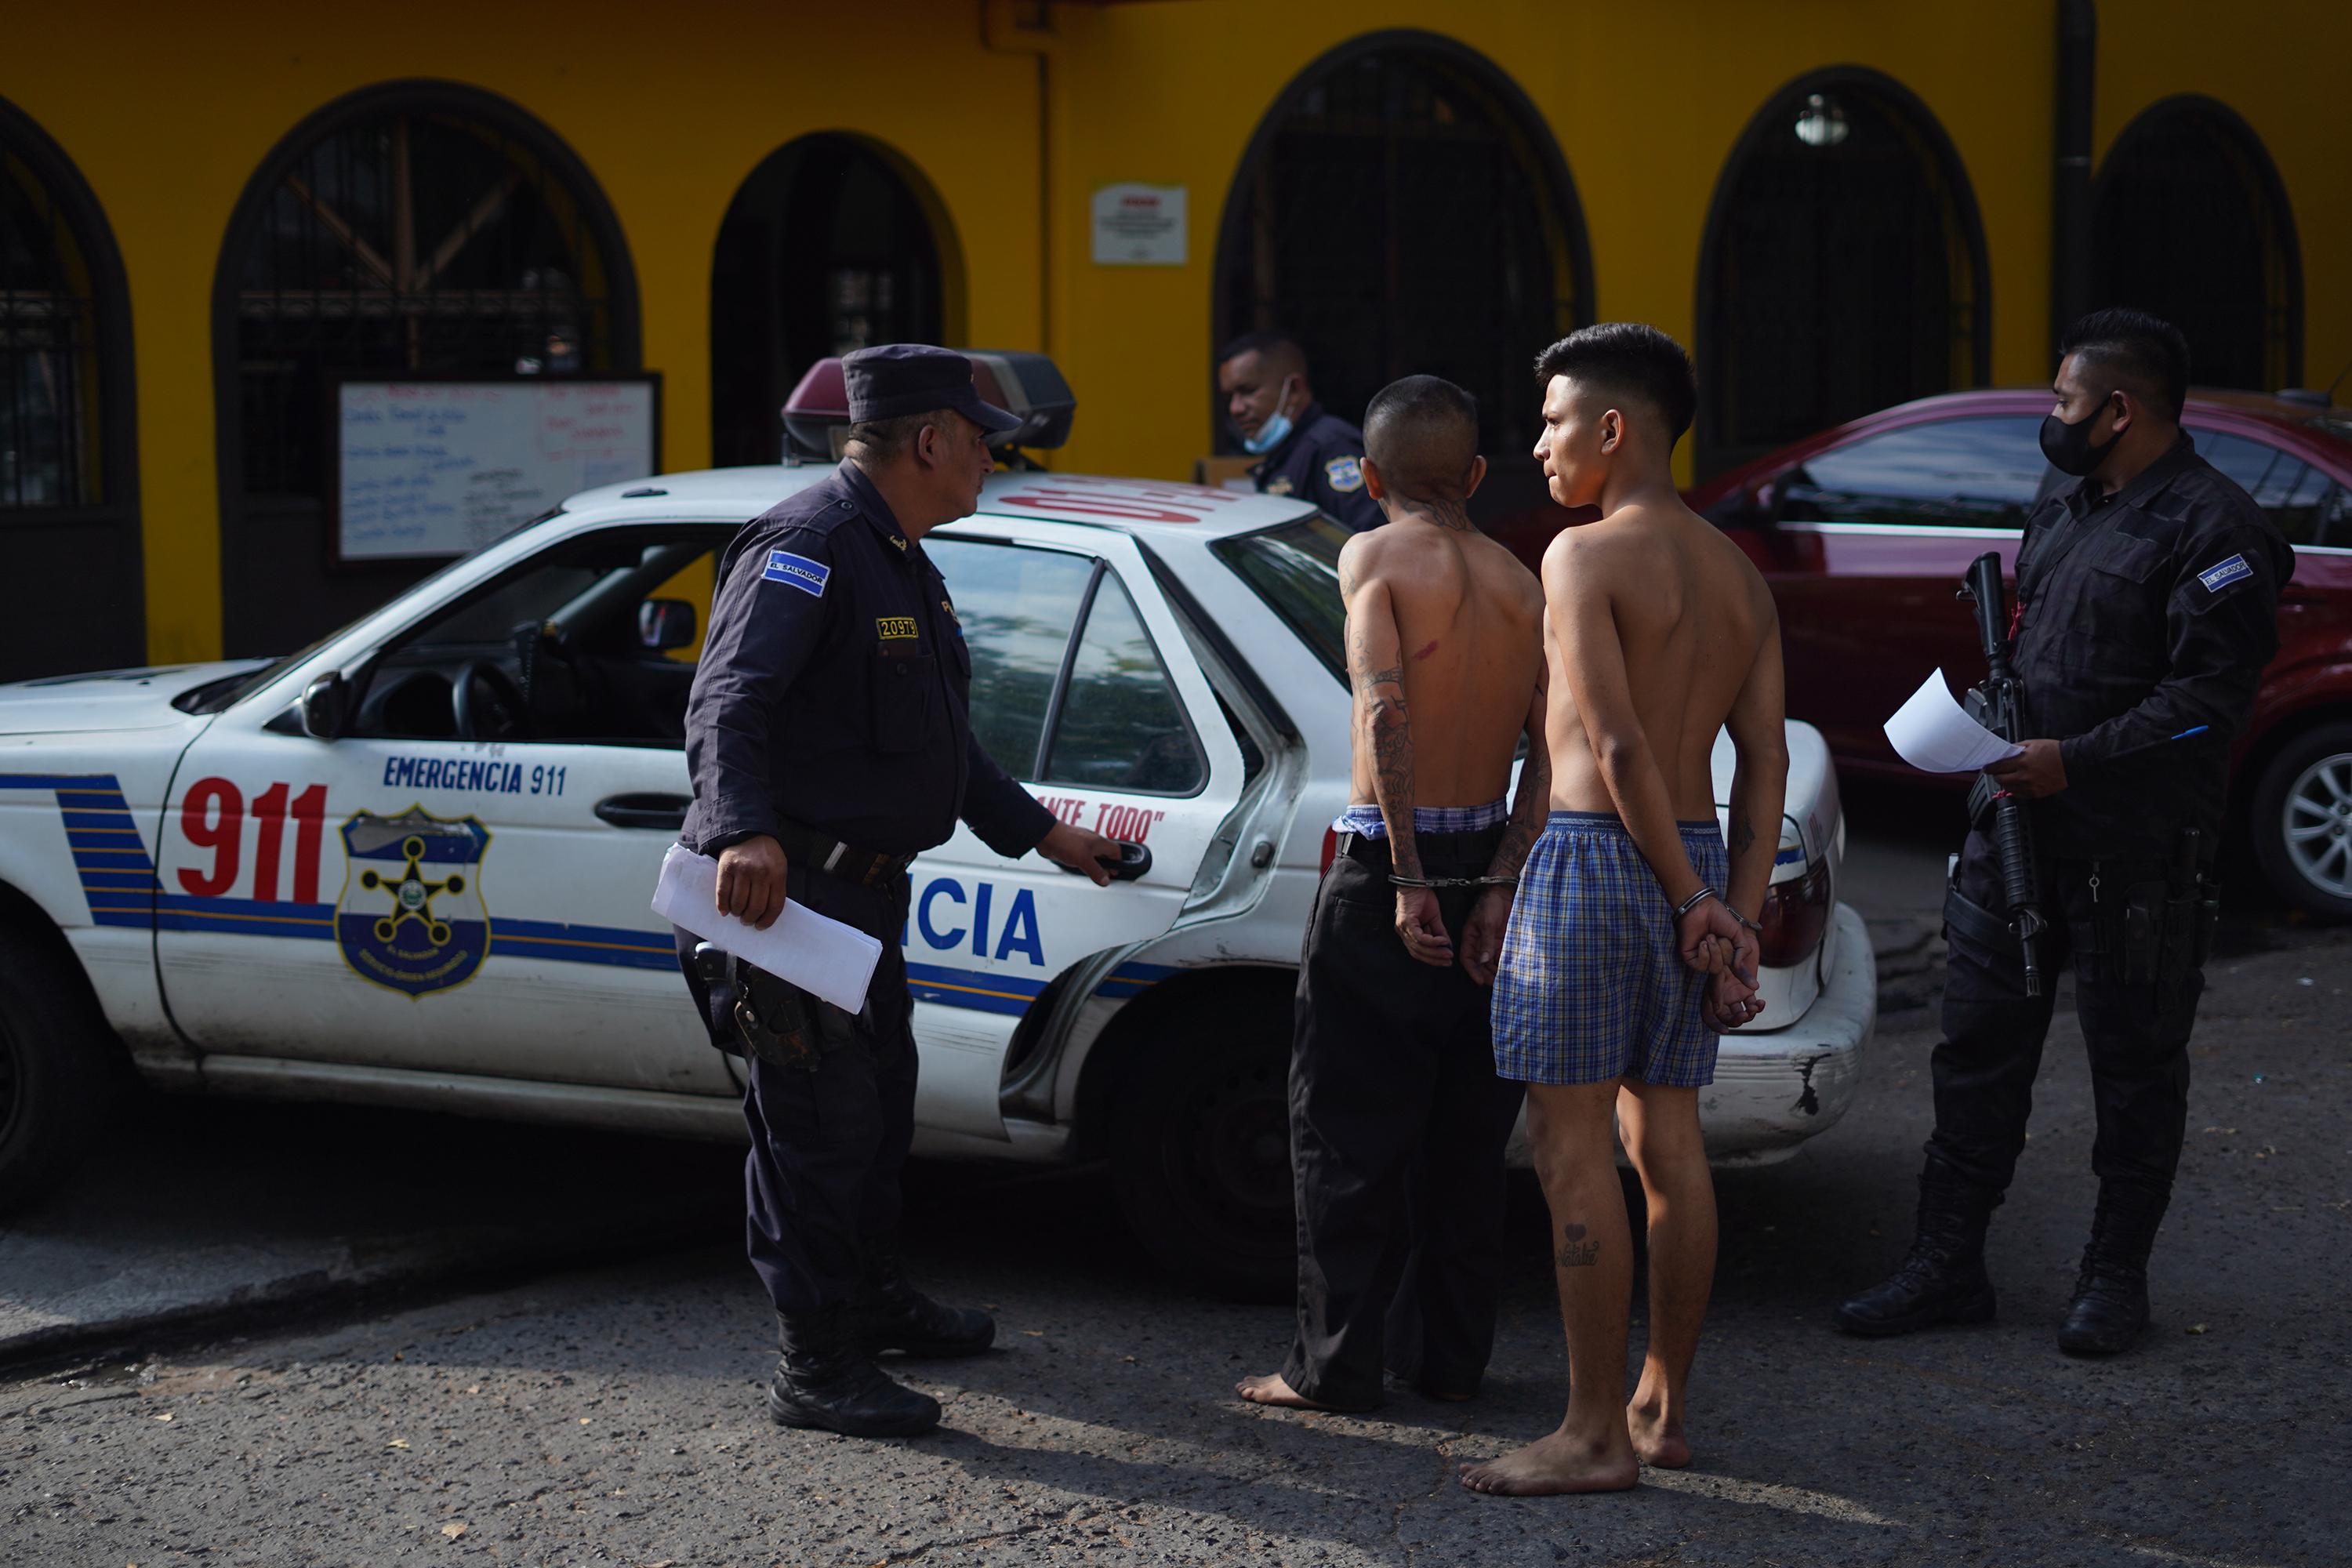 Police officers load two detainees into a patrol car in front of the Attorney General’s Office in San Salvador. The alleged gang members were arrested under the state of exception and came to the Attorney General’s Office to seek legal representation from a public defender. Photo Víctor Peña